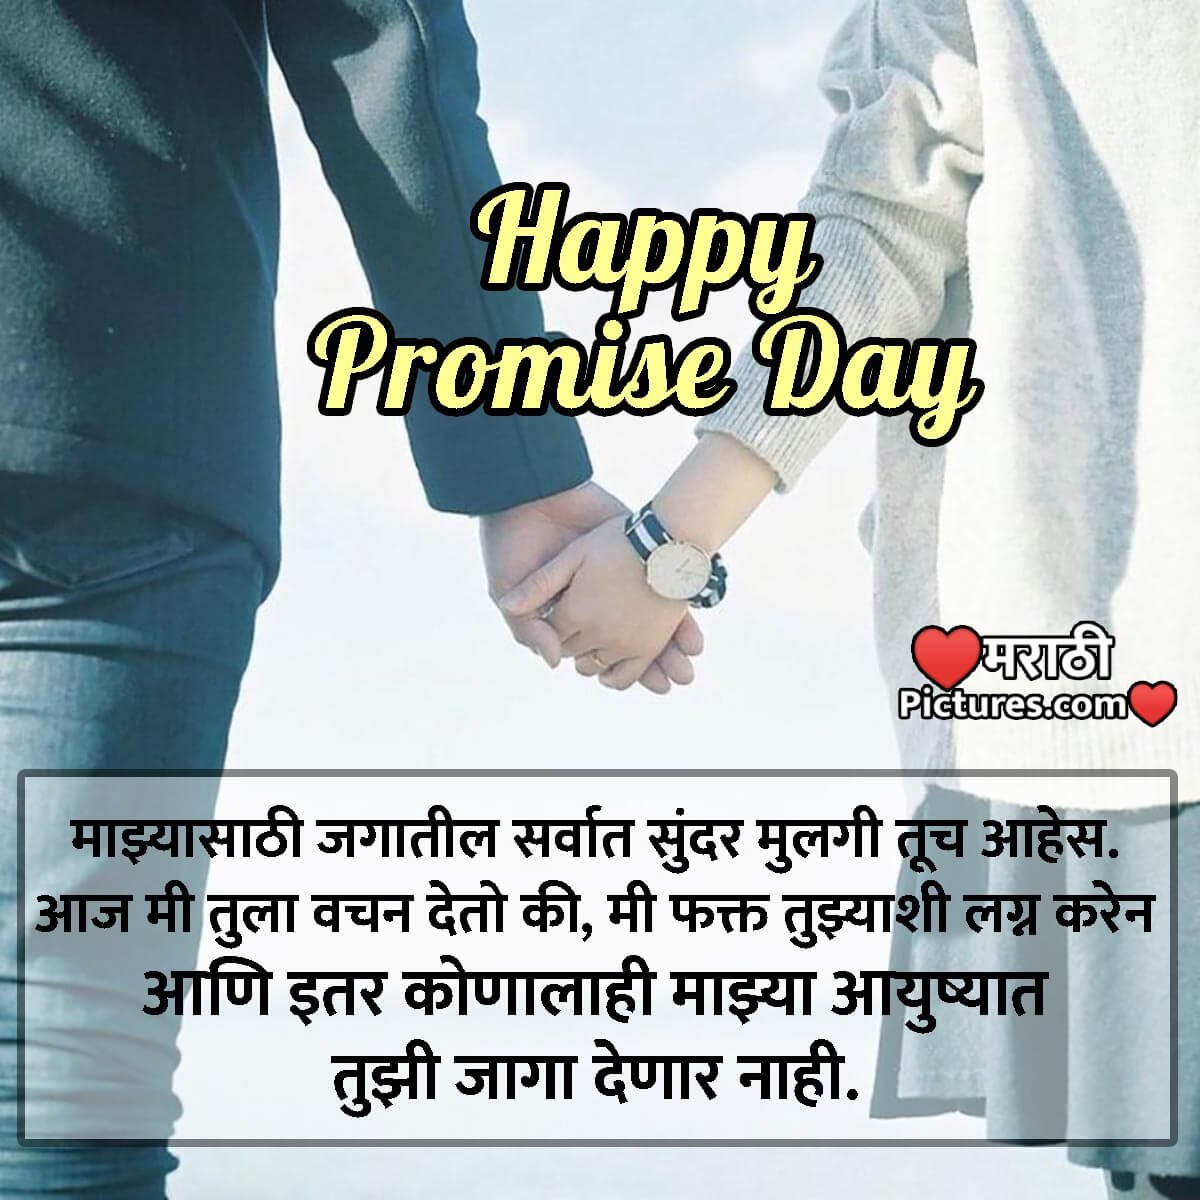 Happy Promise Day Image In Marathi For Girlfriend